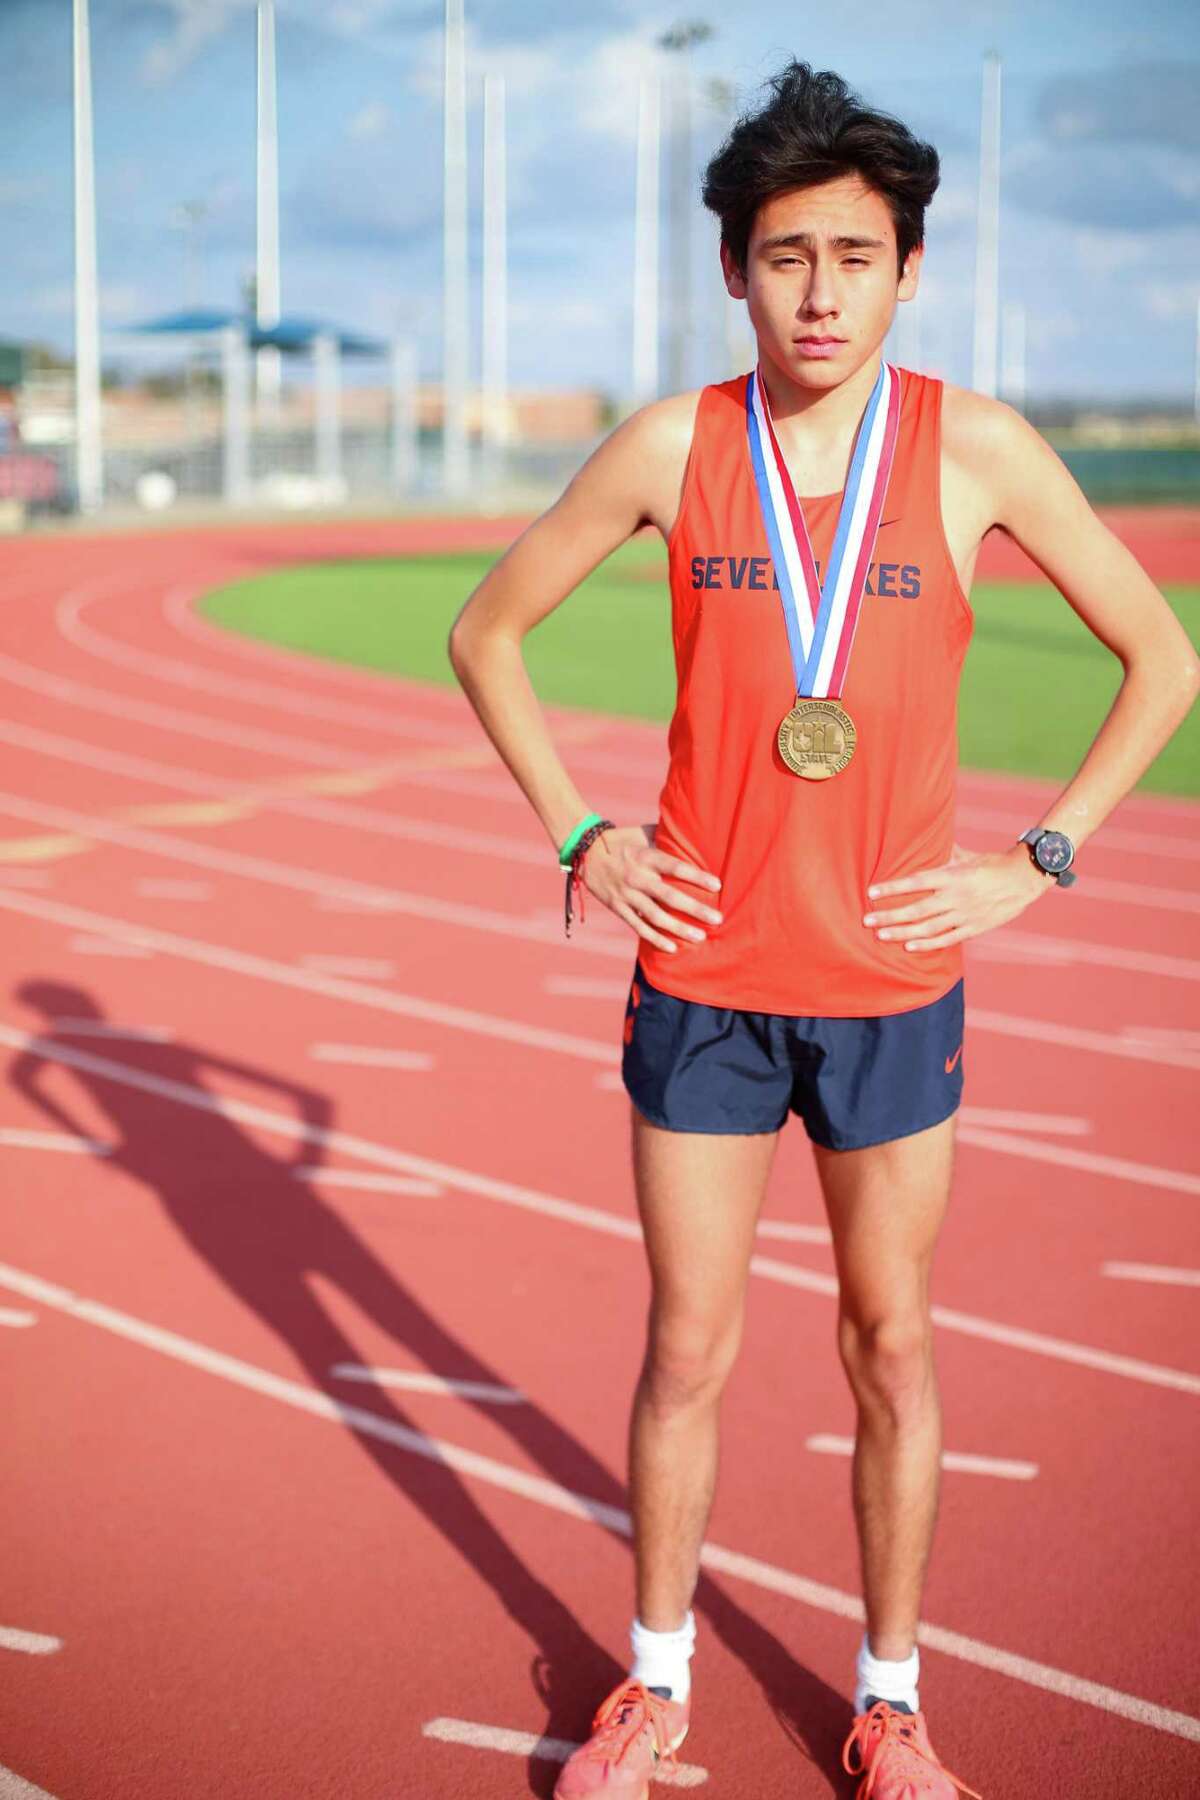 Seven Lakes senior Ruben Rojas is the Houston Chronicle’s All-Greater Houston boys cross country runner of the year, photographed in Katy on Thursday, Dec. 9, 2021.